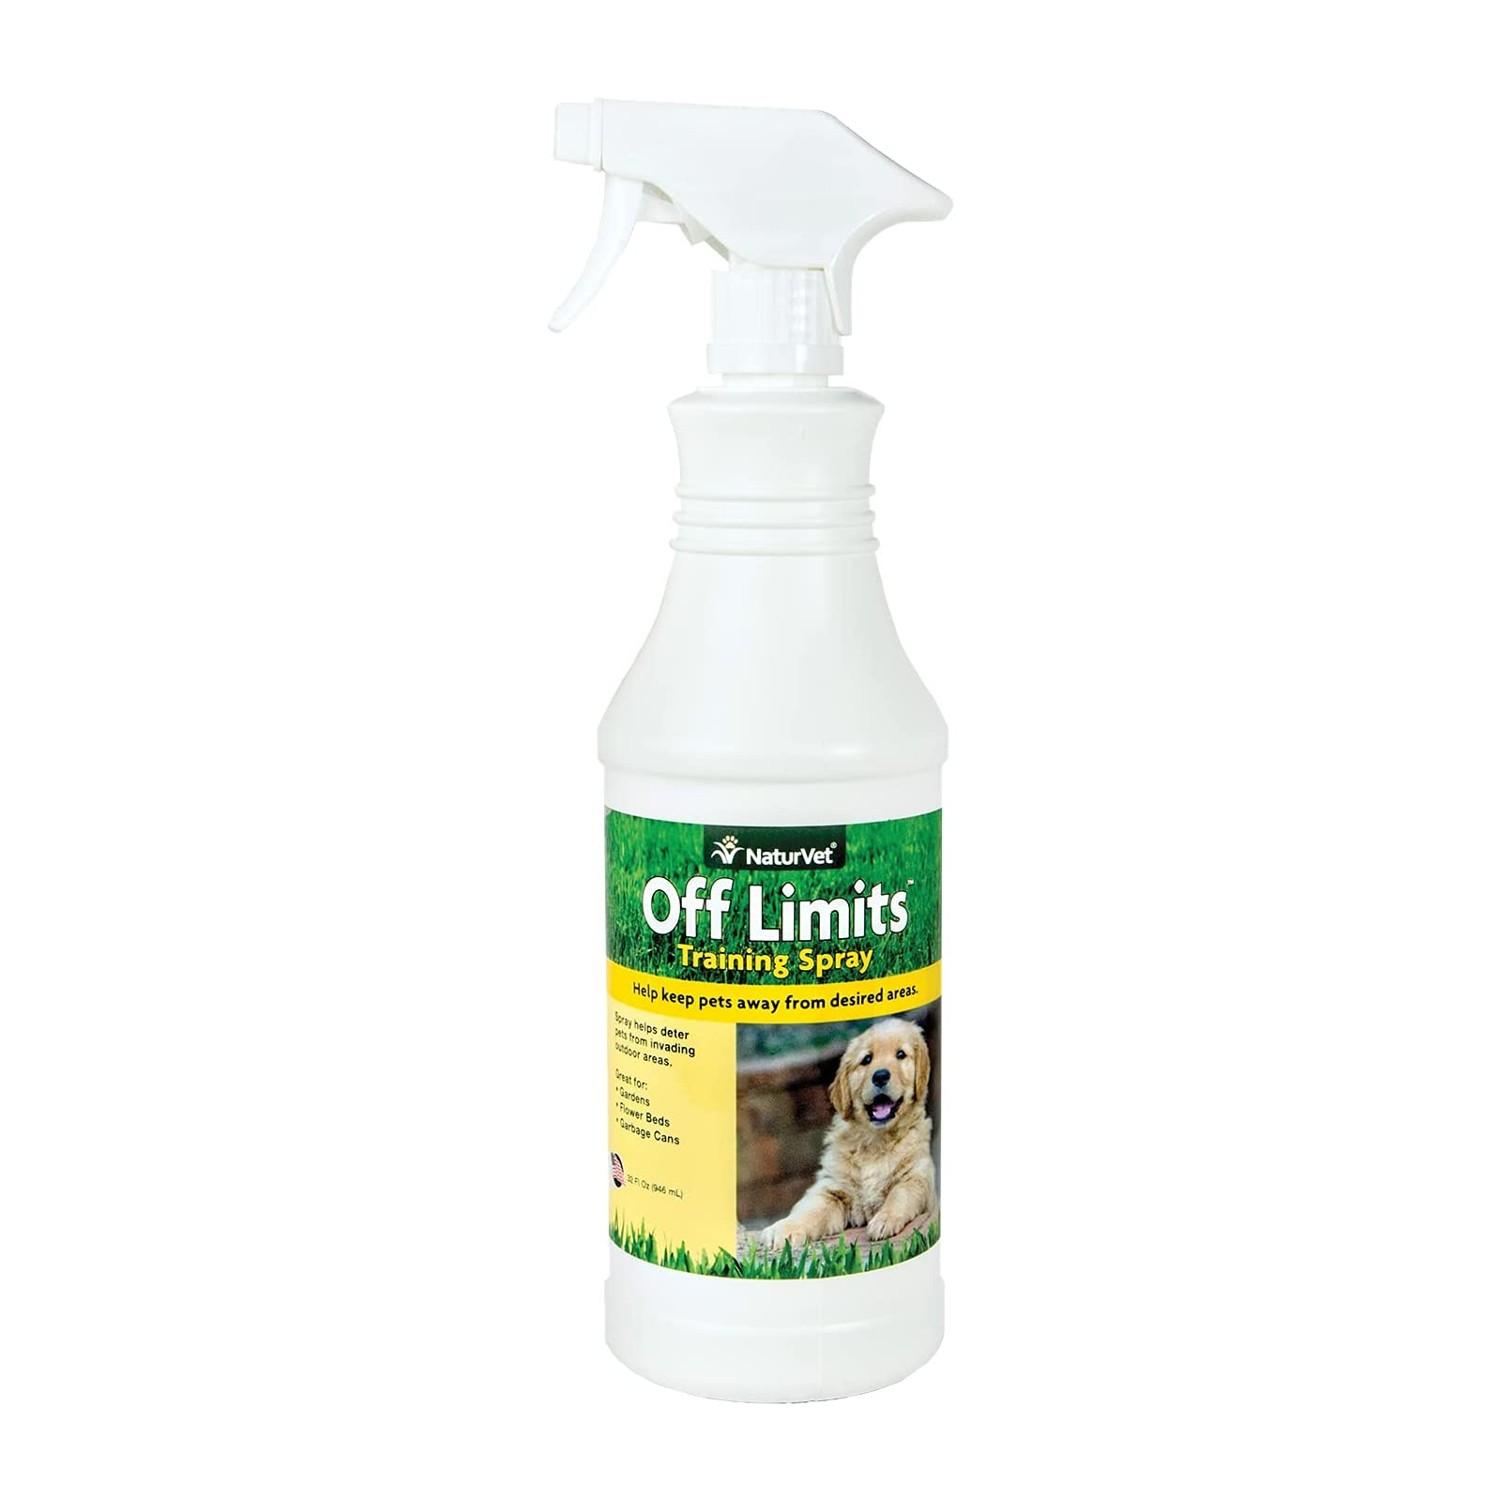 NaturVet Pet Off Limits Training Spray for Dogs and Cats